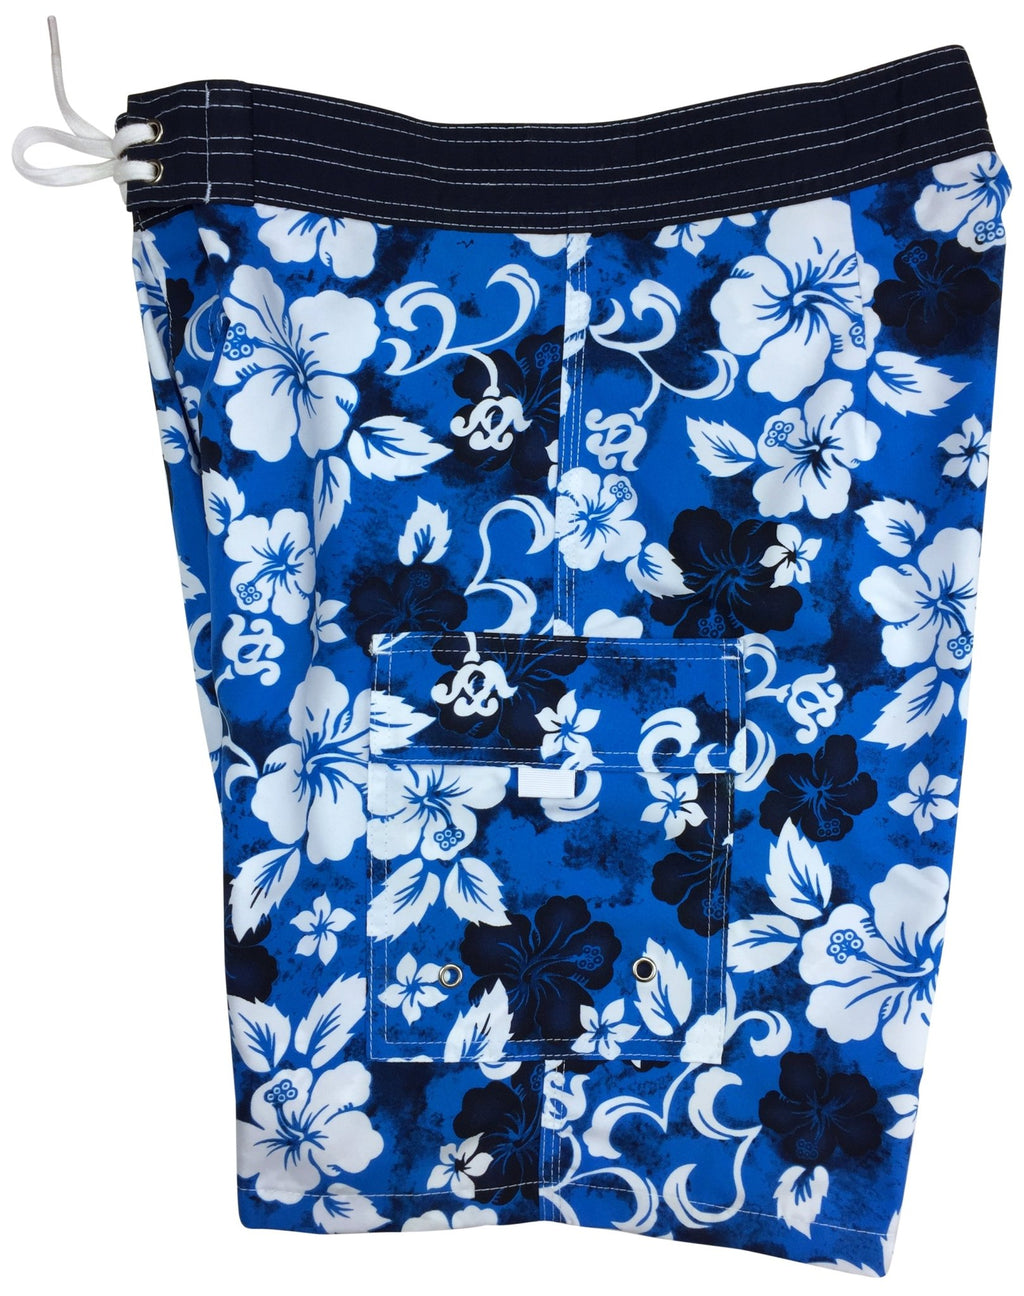 "Jungle Boogie" Mens Board Shorts - 7" Inseam (Blue) - Board Shorts World Outlet